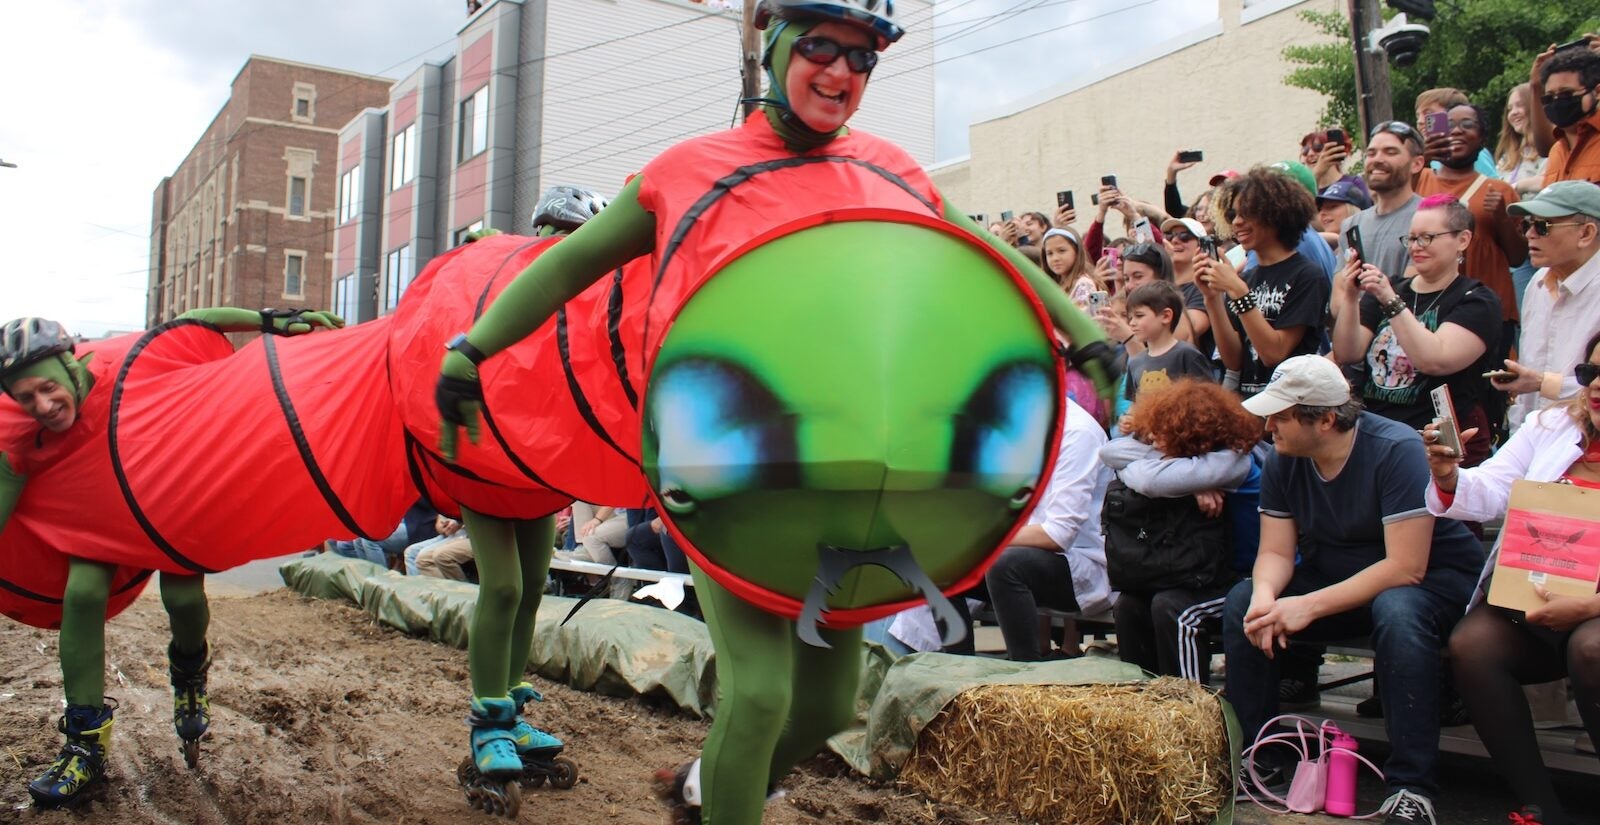 Kensington Derby participants dressed as a caterpillar on roller skates ride through the mud pit